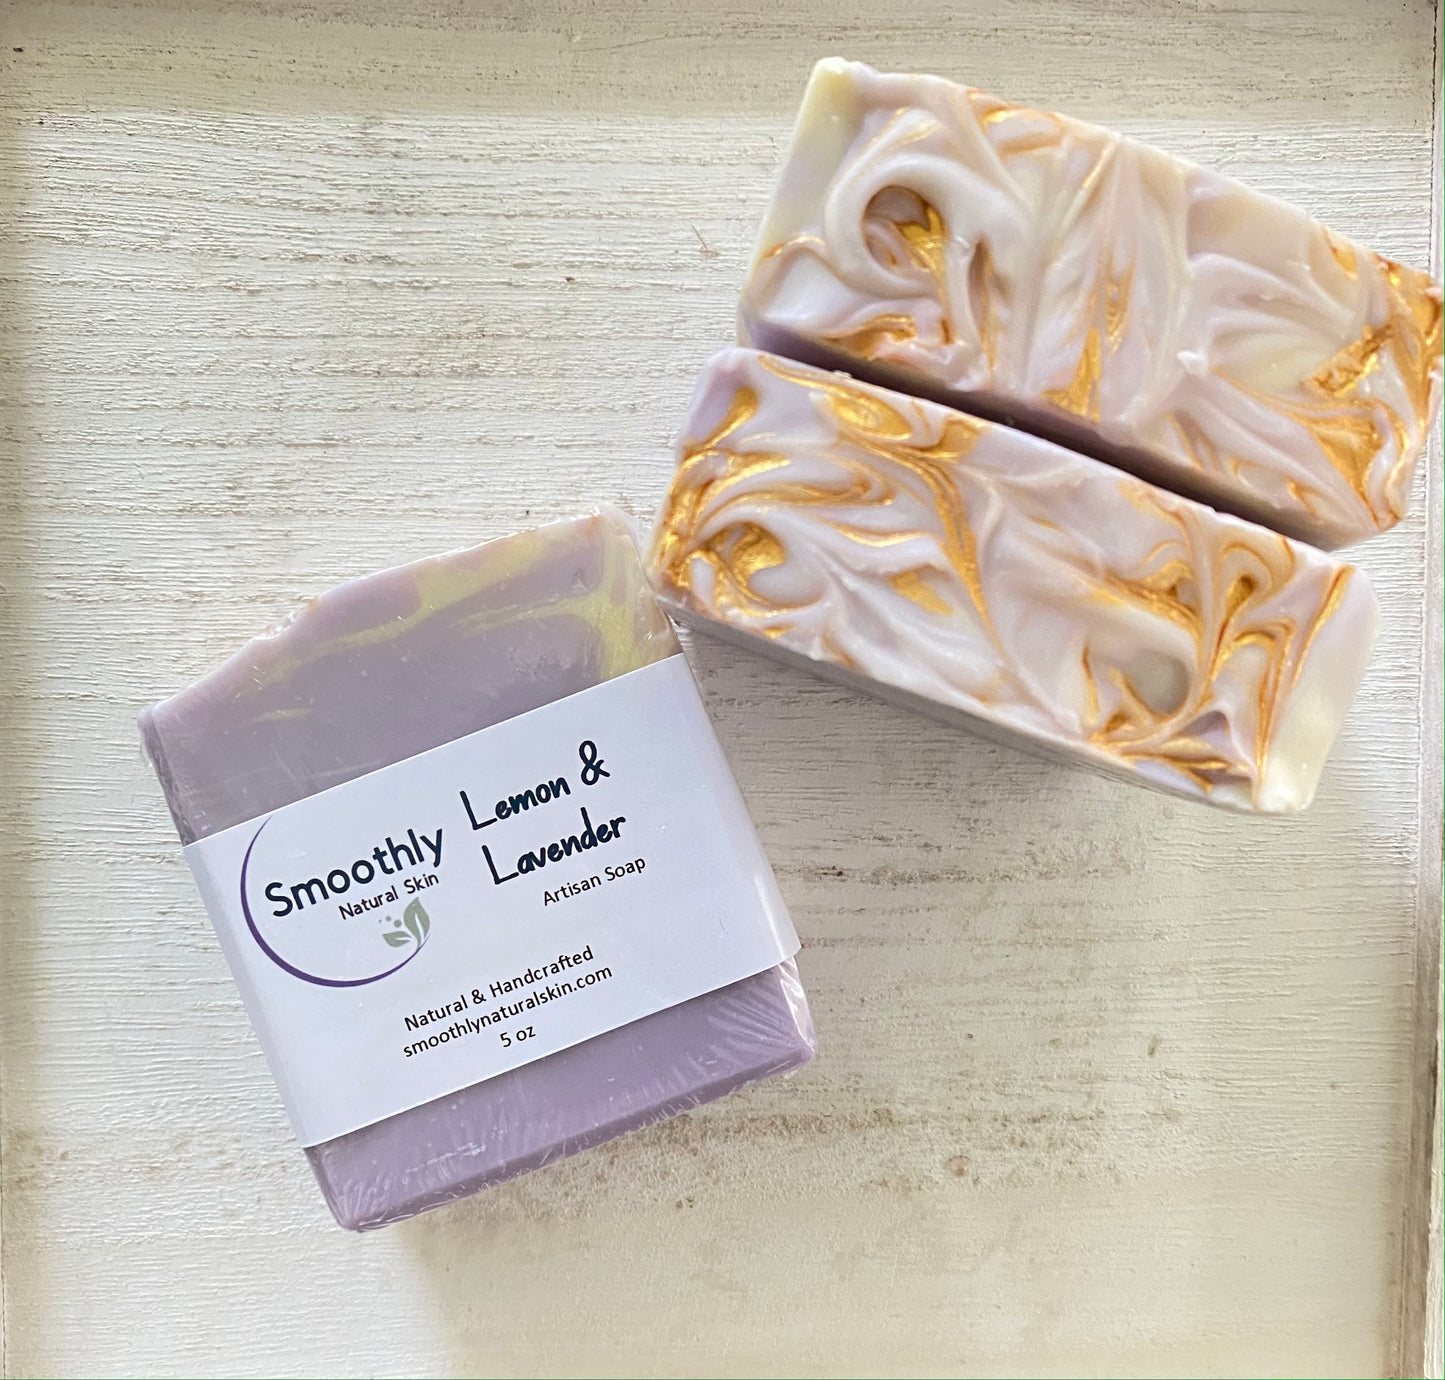 Our Lemon Lavender Soap has a garden-fresh blend which opens with bright lemon and sweet orange. The citrus tones are lifted with eucalyptus as they lead to a classic lavender bouquet at the heart of the scent. Shimmering green accents create an intriguing freshness for the floral element. Smoothly Natural Skin 